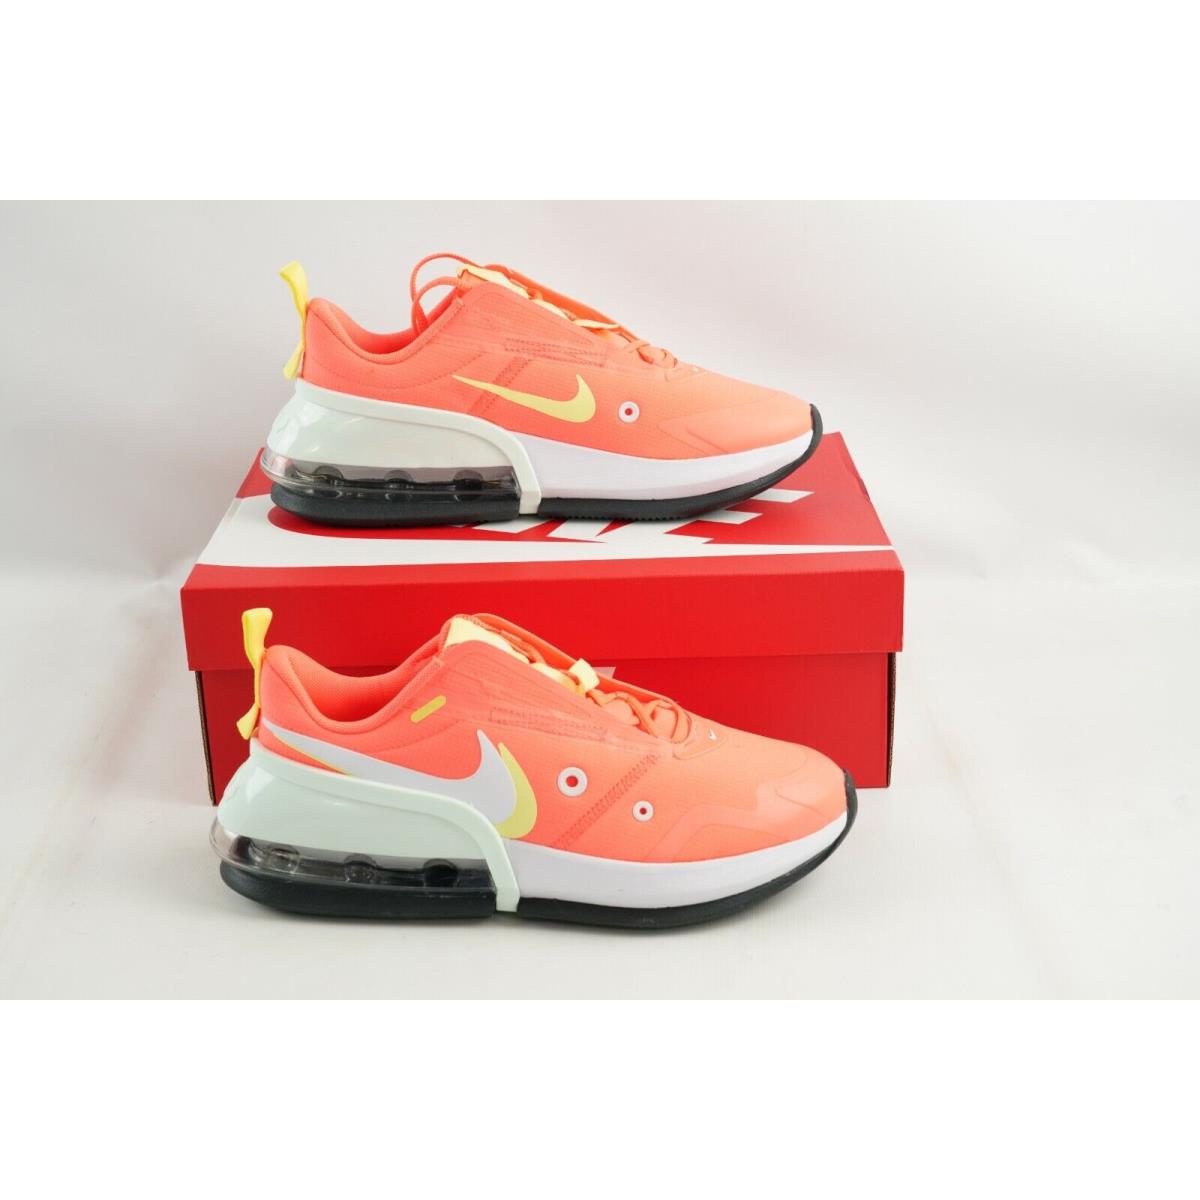 Nike Air Max Up CW5346 800 Athletic Shoes Sneakers Bright Orange Women`s Size 8